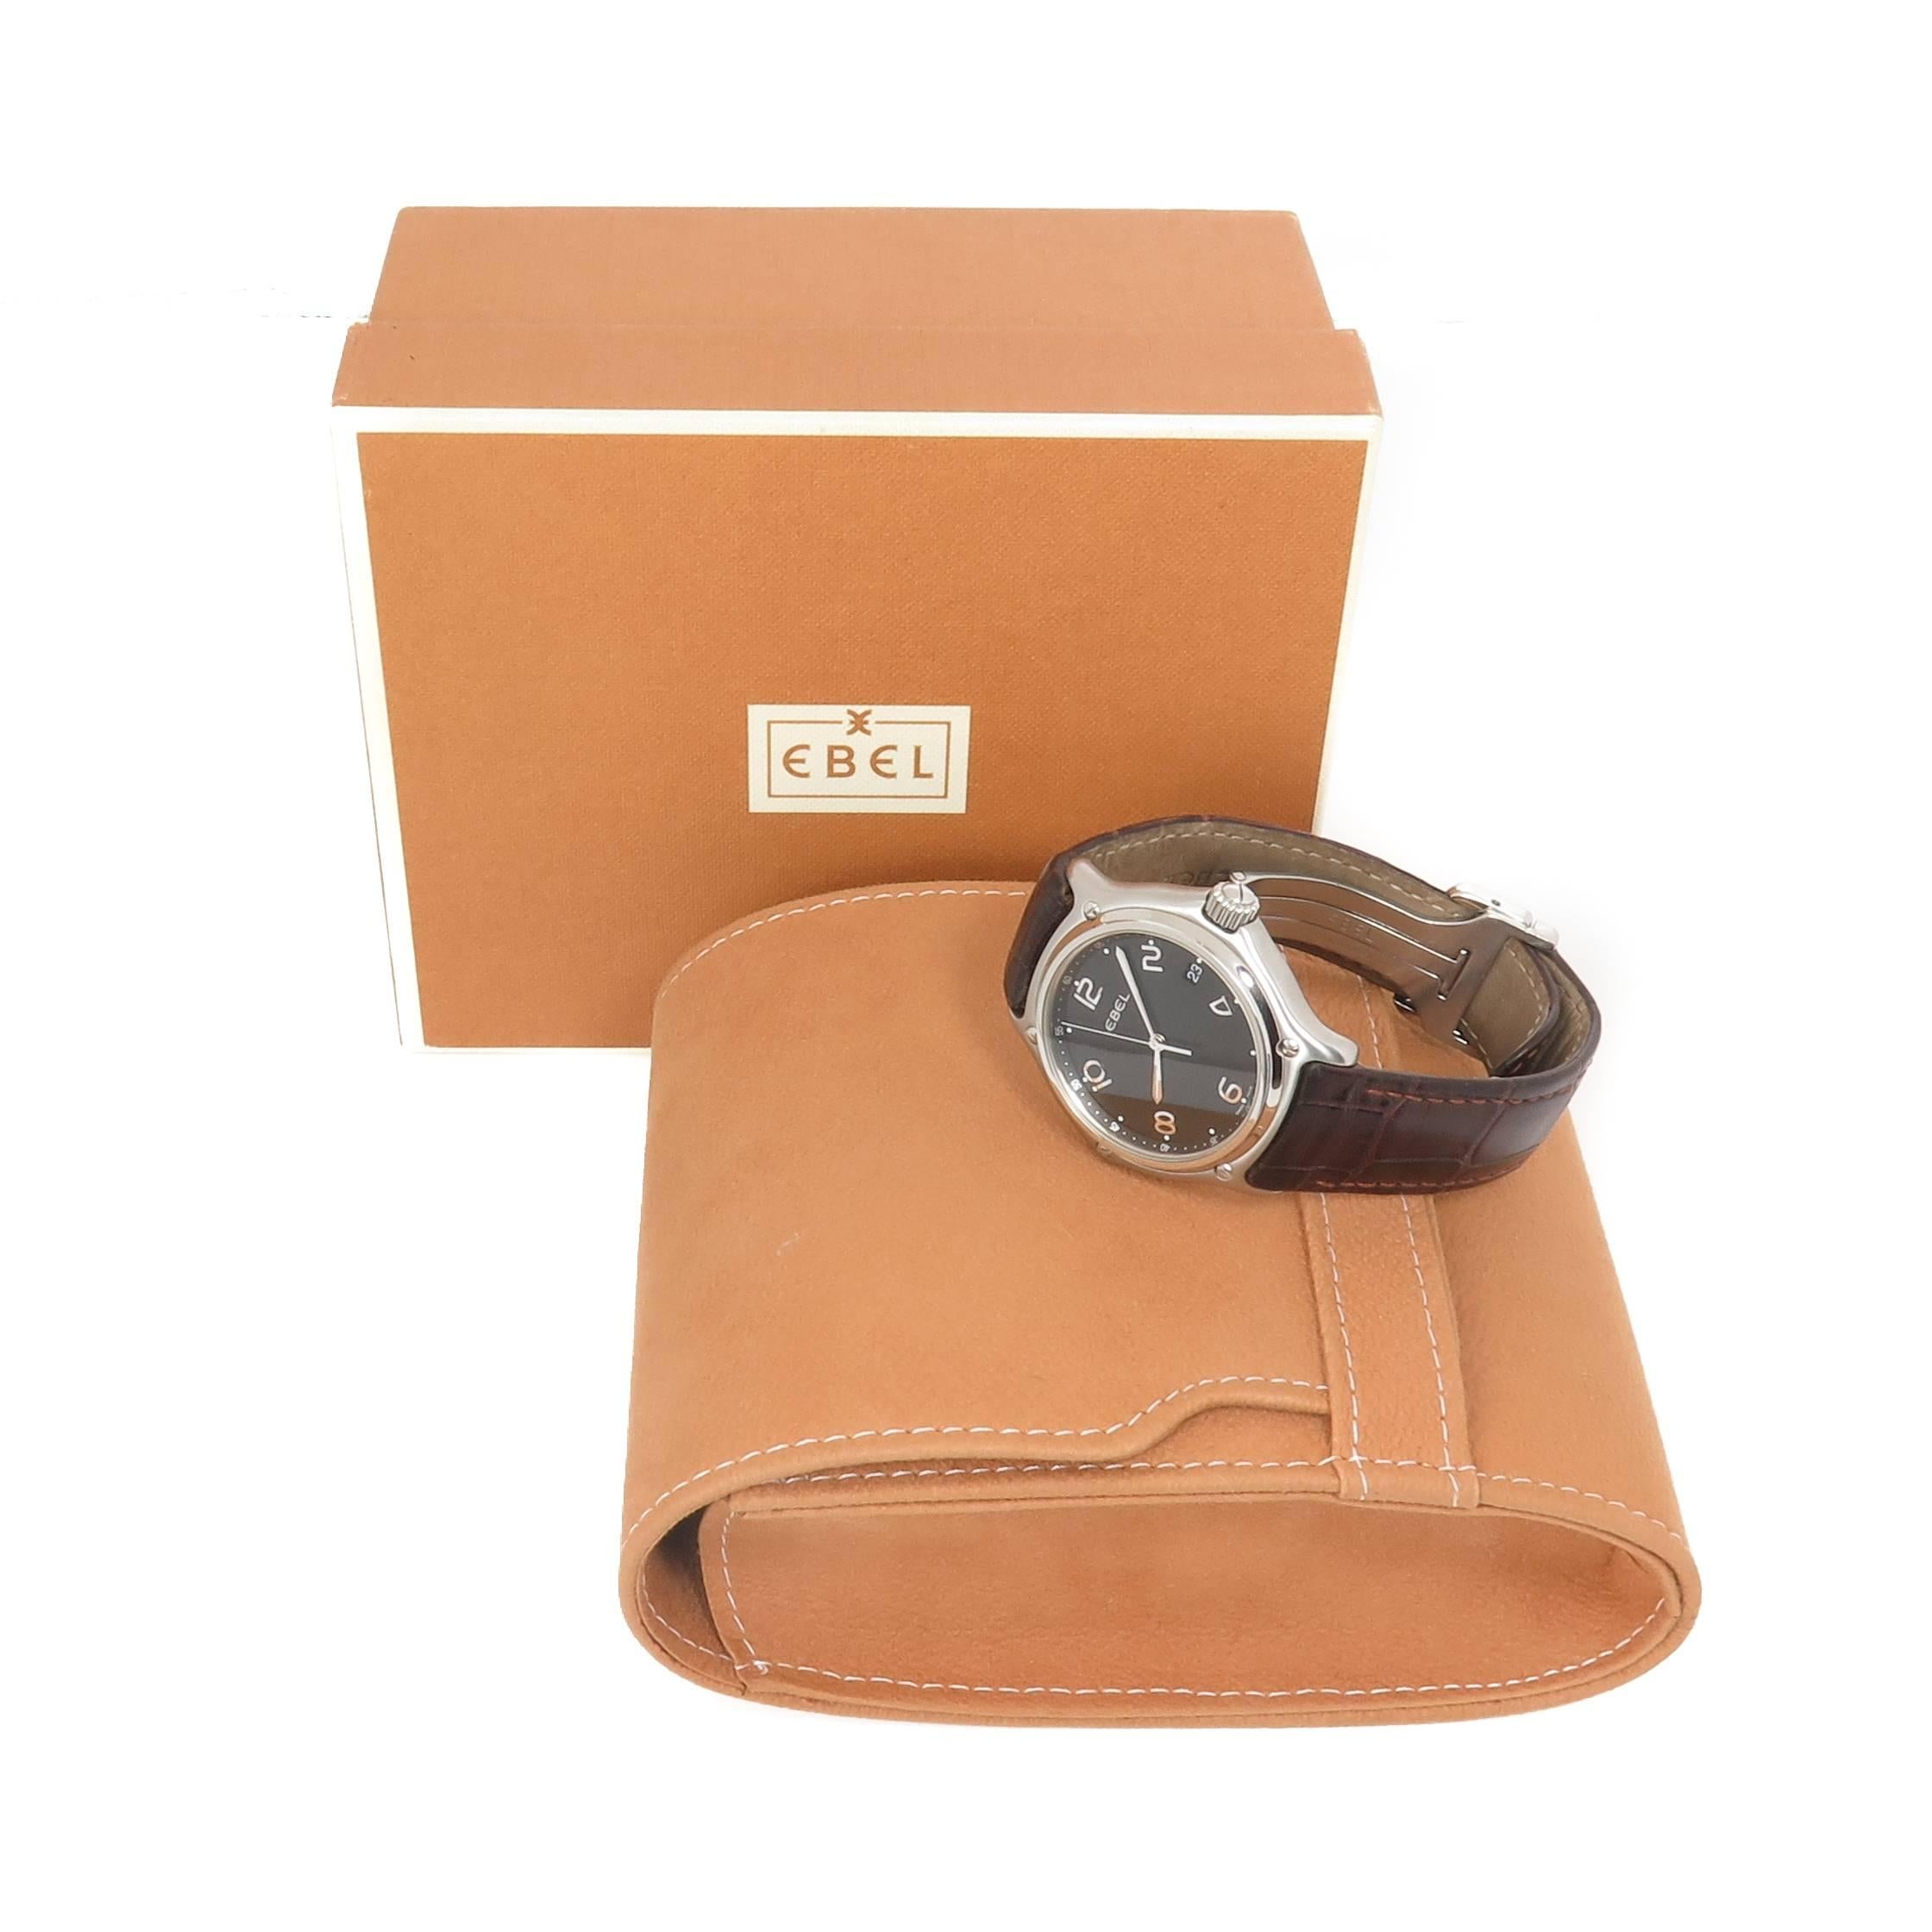 Circa 2000 Ebel 1911 collection Wrist watch, 37 MM 3 Piece Stainless Steel Water Resistant case, Quartz Movement, Black Dial with raised Markers, sweep seconds hand and a calendar window at the 3.  Brown textured strap with Ebel Steel  fold over